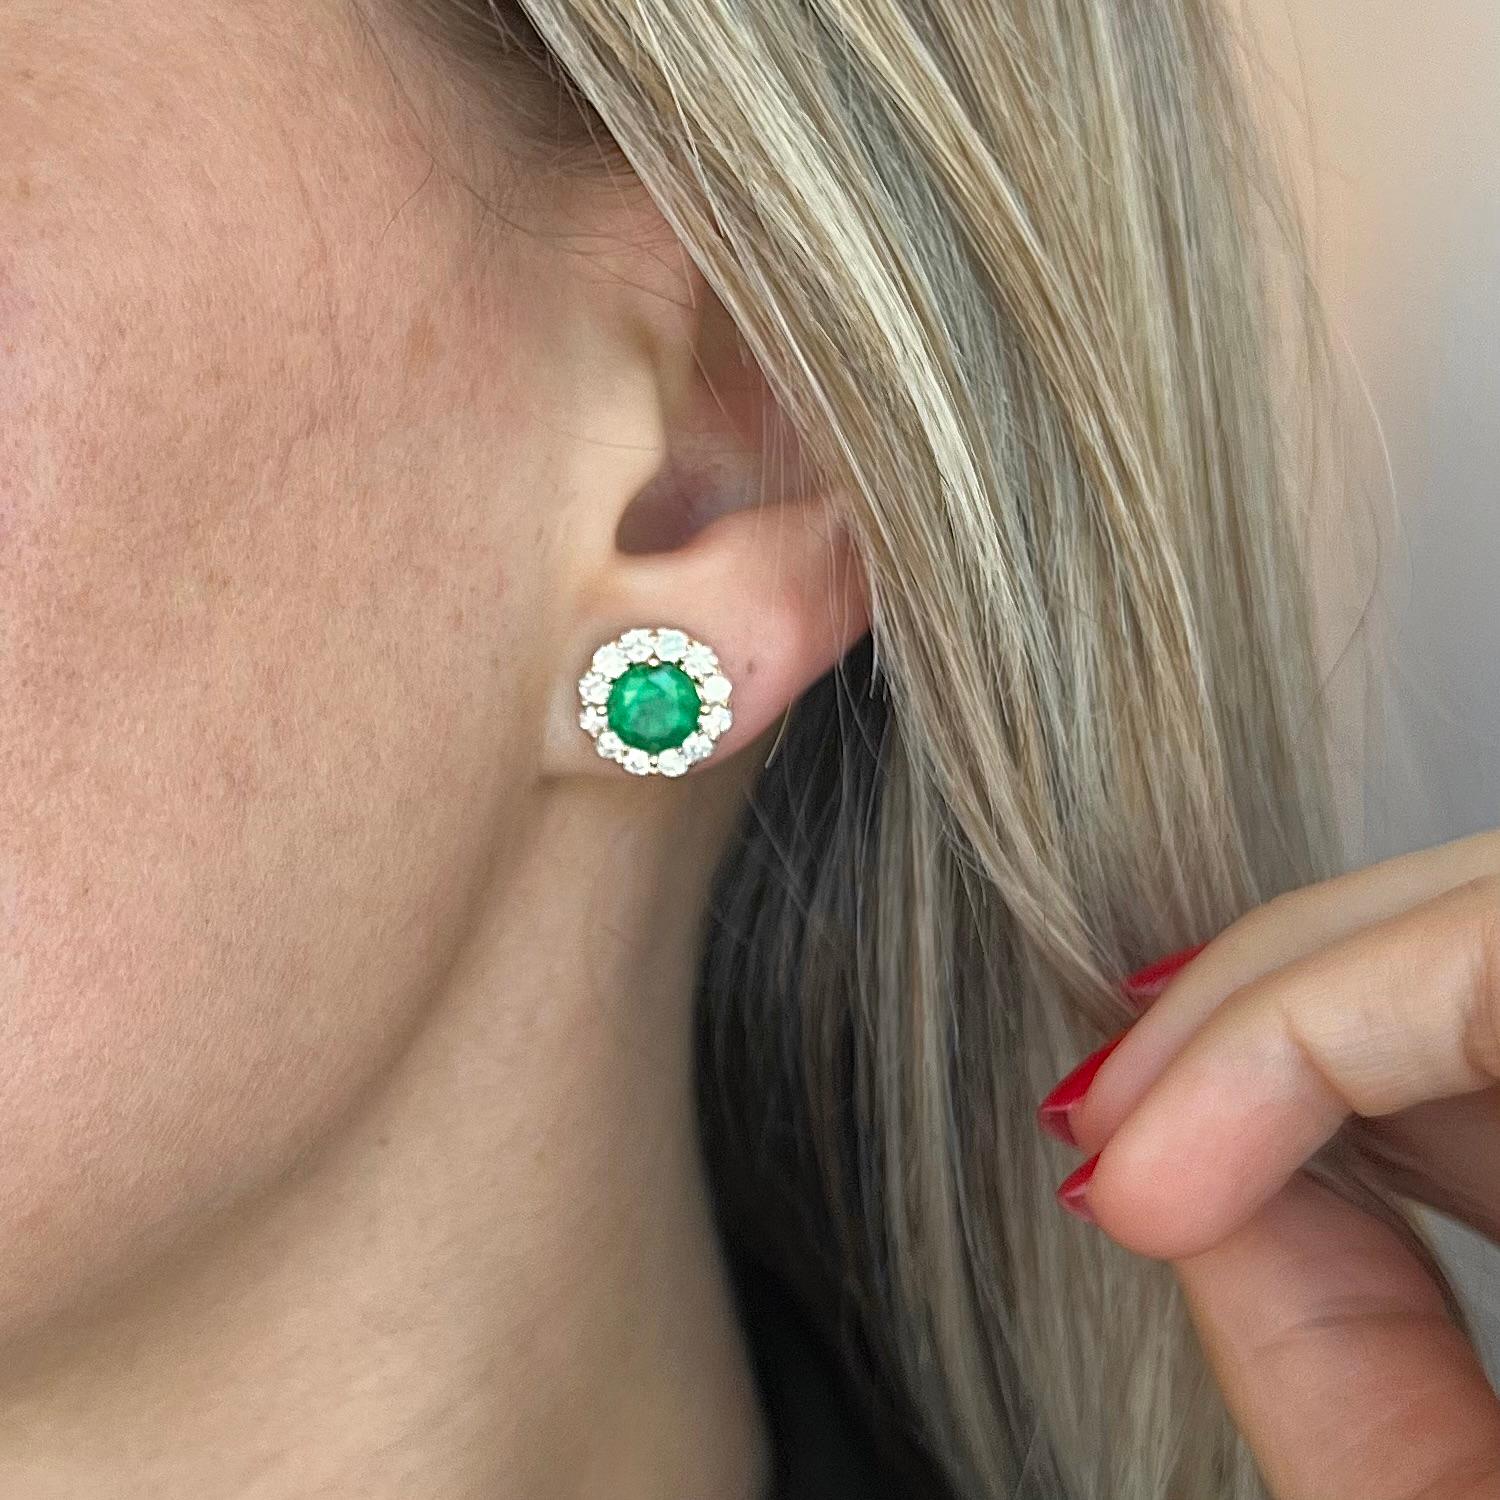 18 karat yellow gold Earth Mined emerald and diamond stud earrings. Featuring a stunning vivid green emerald in the center, encircled by top-quality earth mined diamonds.
The emerald weighs 3.08 carats and is the centerpiece of these earrings,